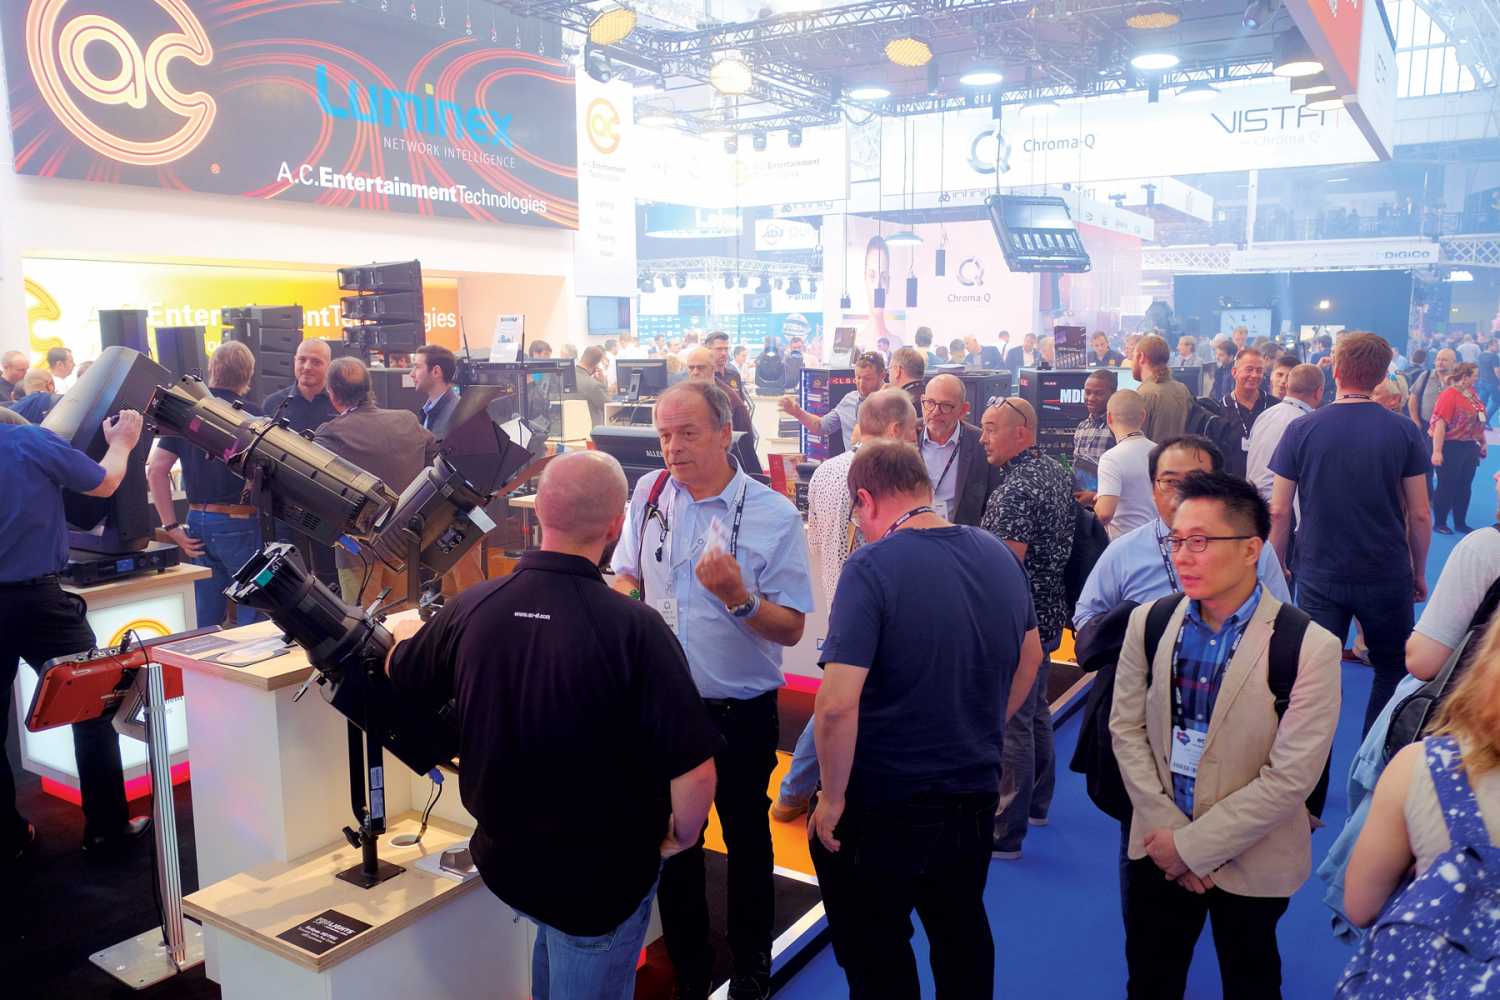 The PLASA Show 2019 takes place 15-17 Sept at London Olympia